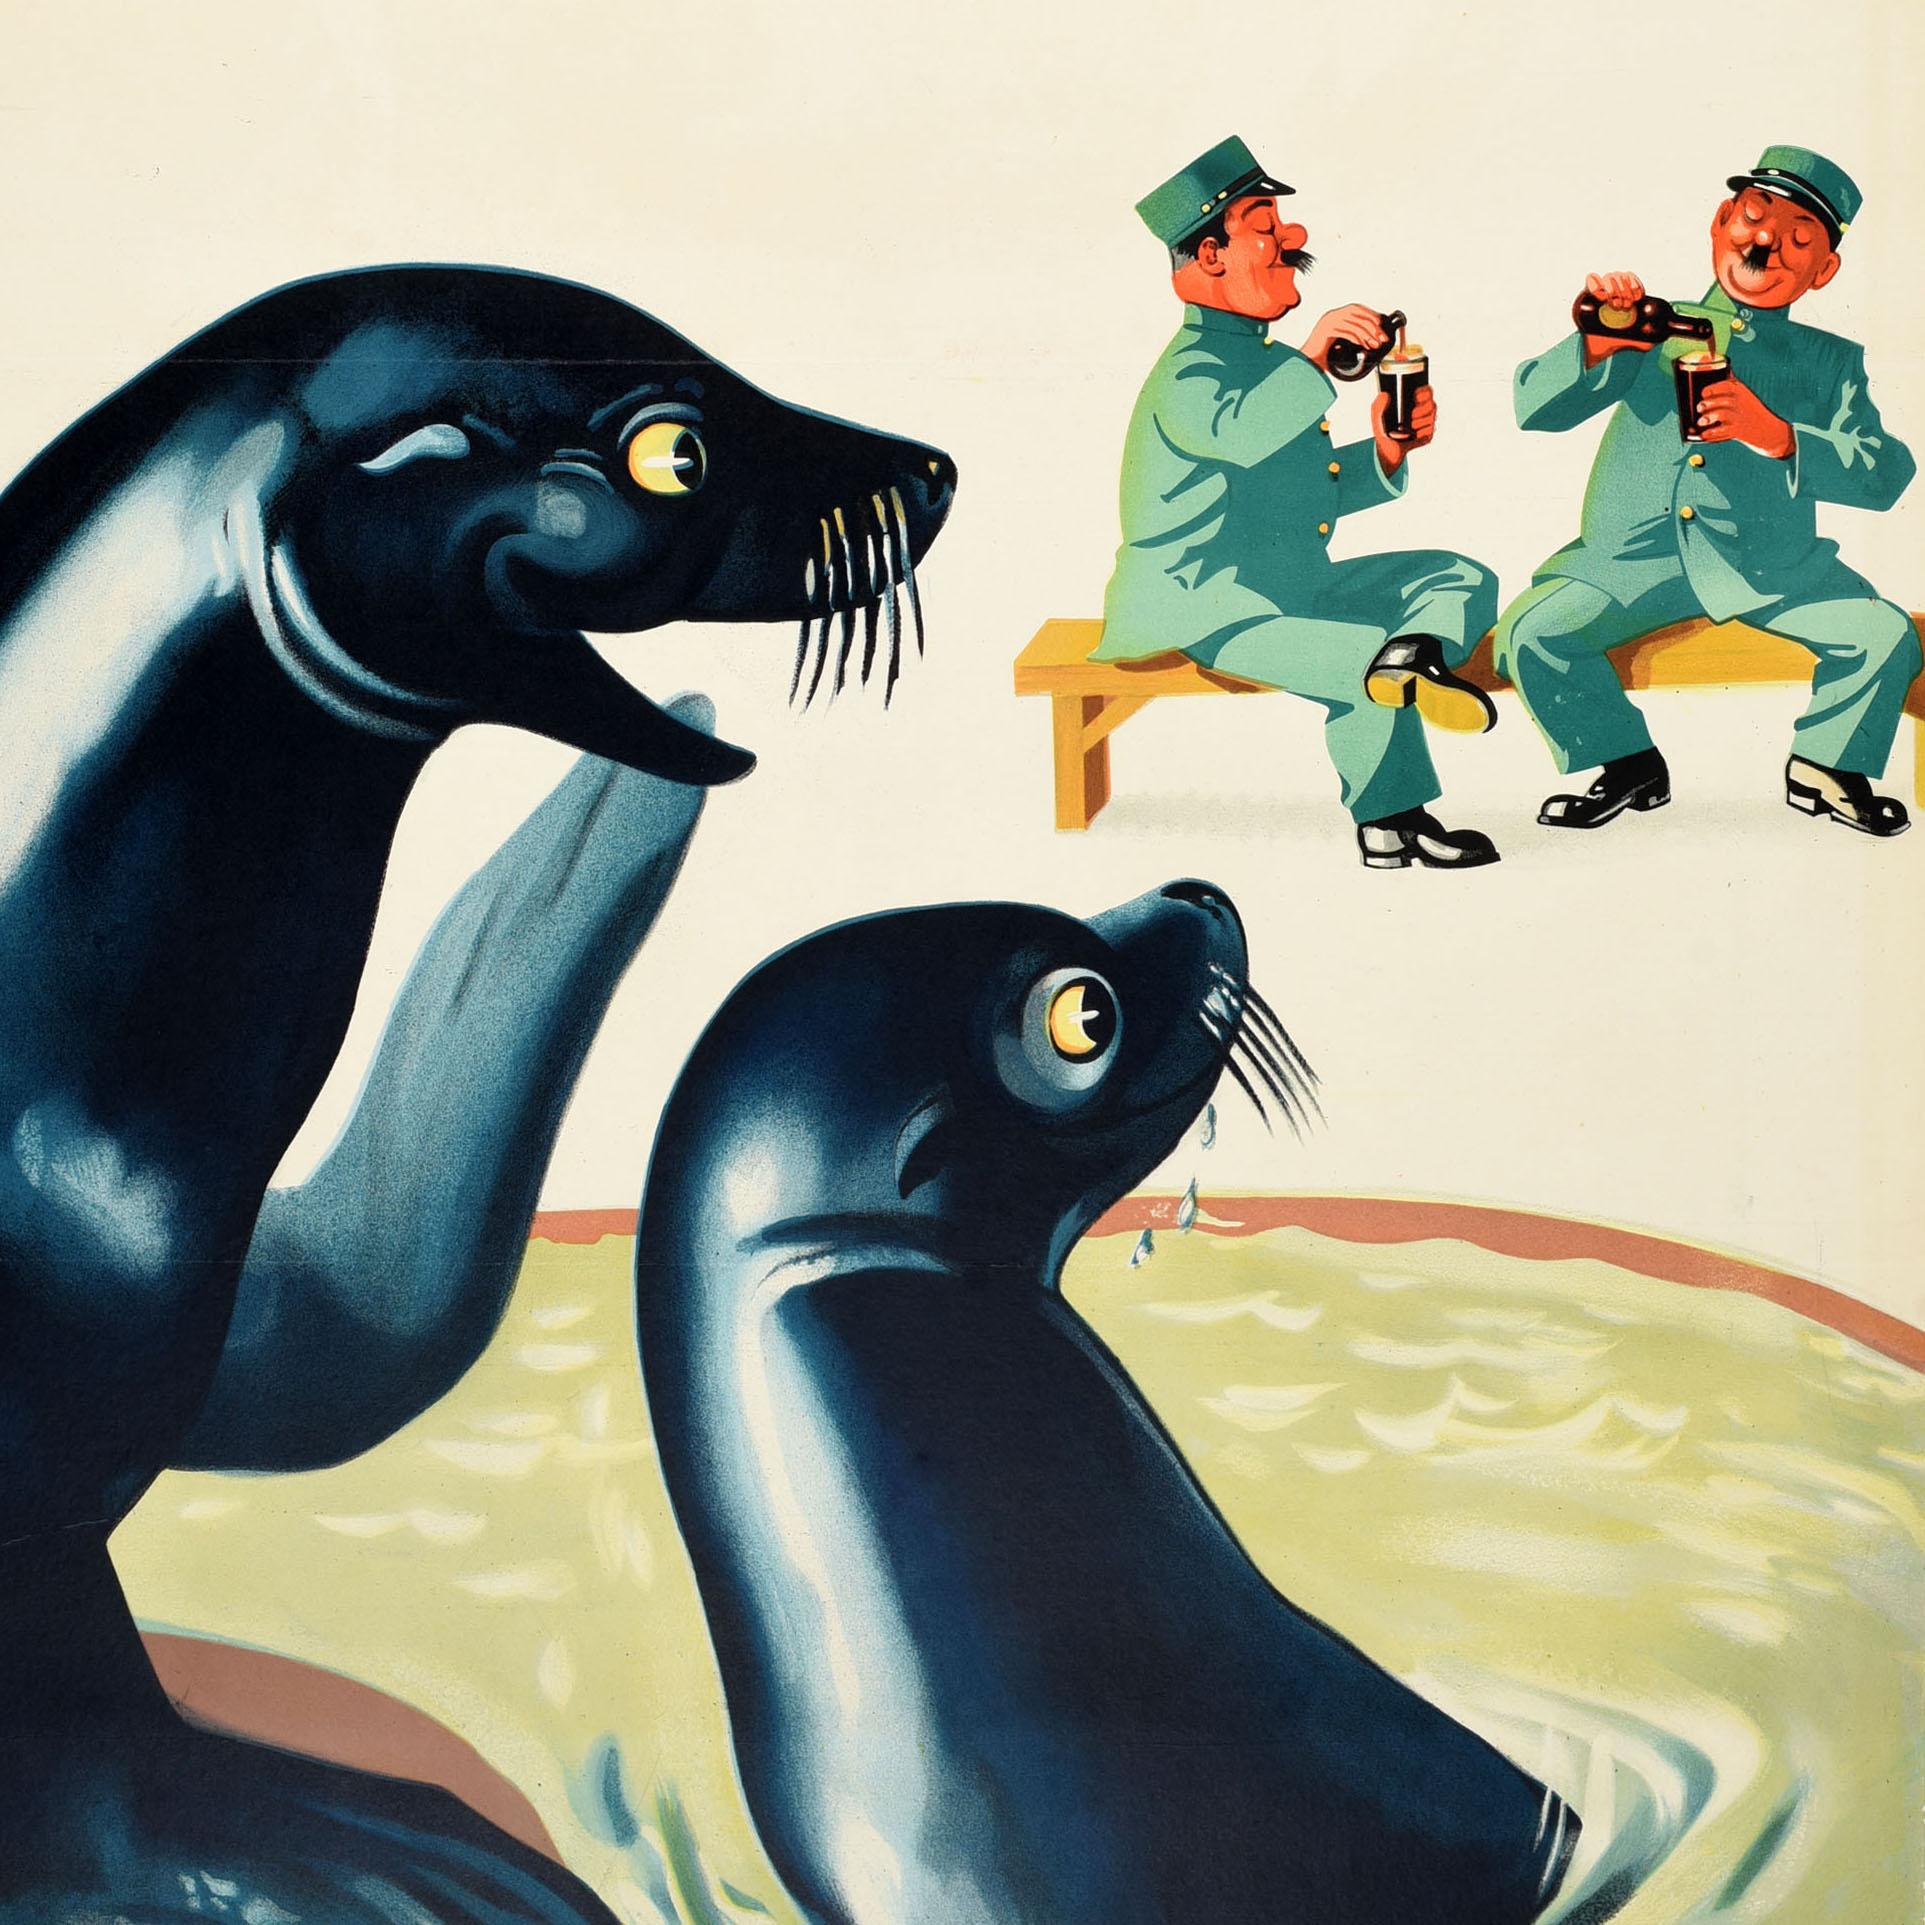 Original vintage advertising poster for the iconic drink Guinness Irish stout beer with the quote in red - Lovely Day For A Guinness - above a fun image of smiling seals looking at two zoo keepers sitting on a bench and pouring their bottles of